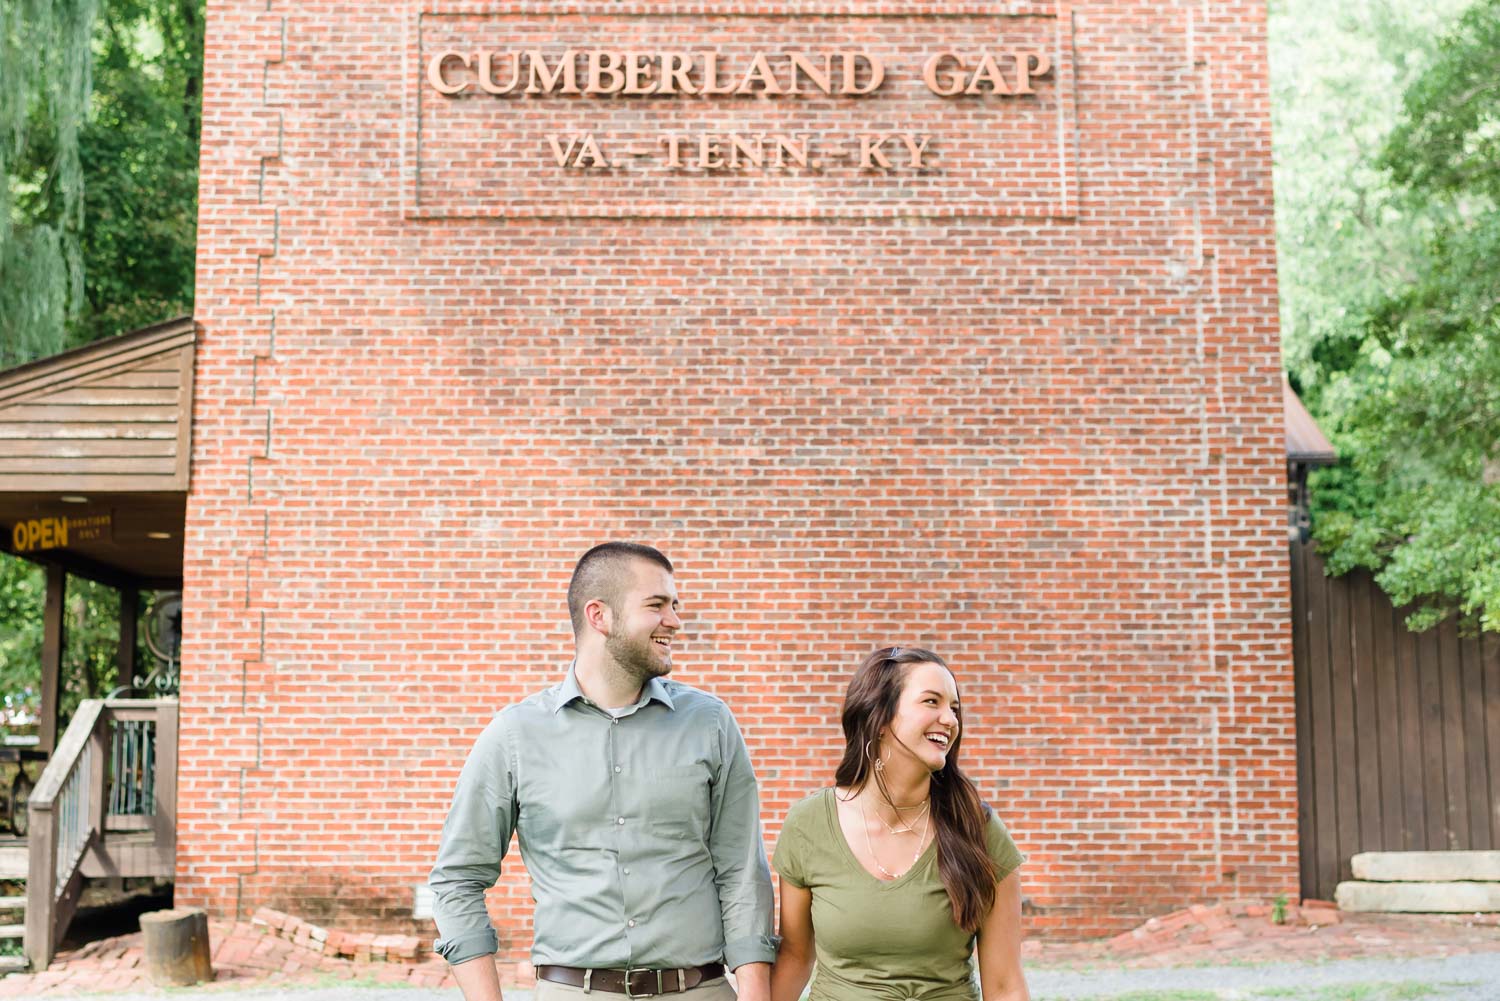 laughing couple outside in front of brick building of the Little Congress Bicycle museum in Cumberland Gap TN